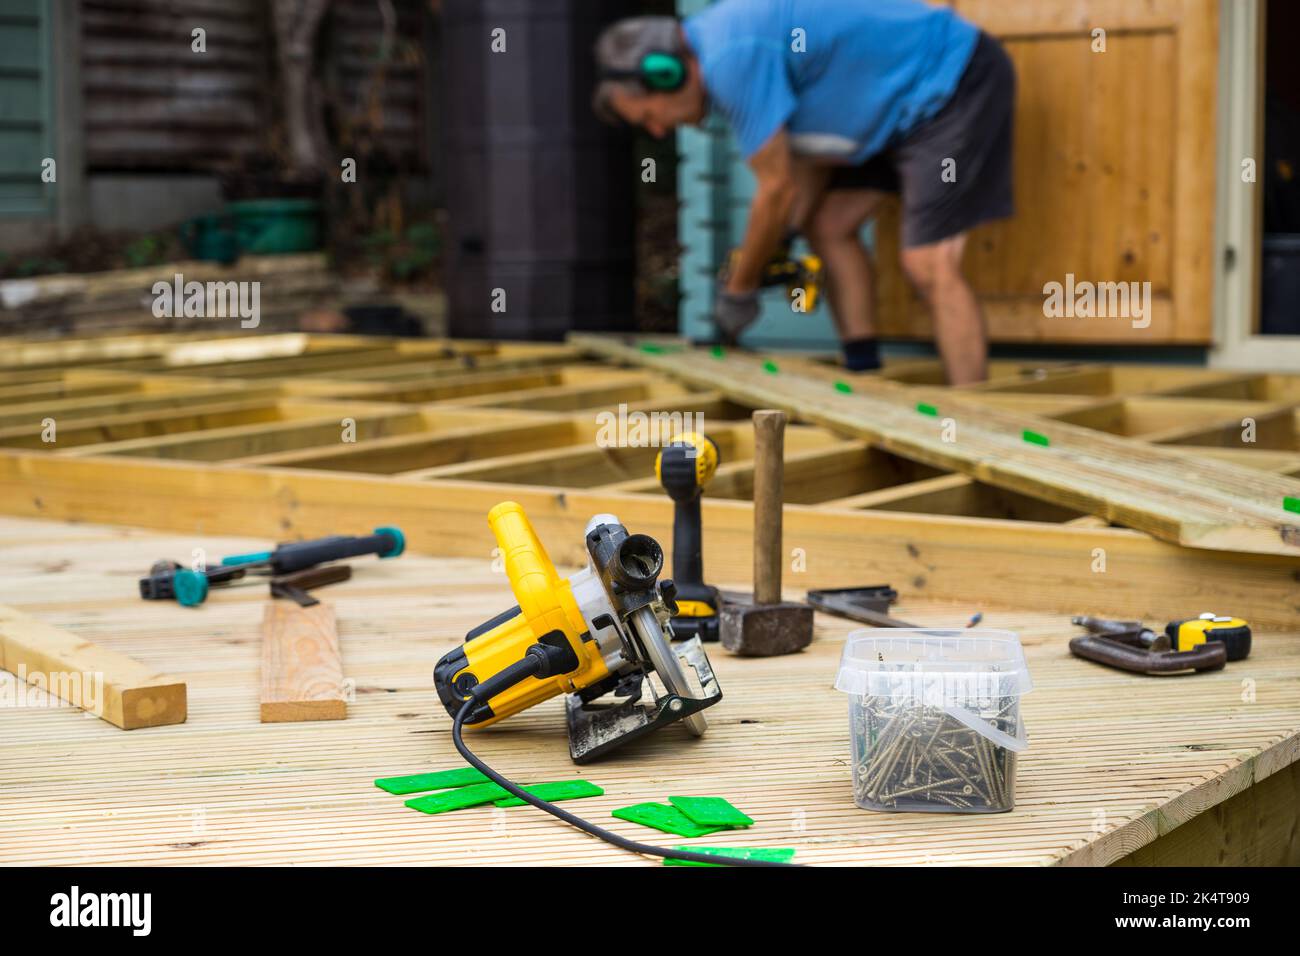 Man constructing a deck, showing decking joists, planks and deck tools Stock Photo